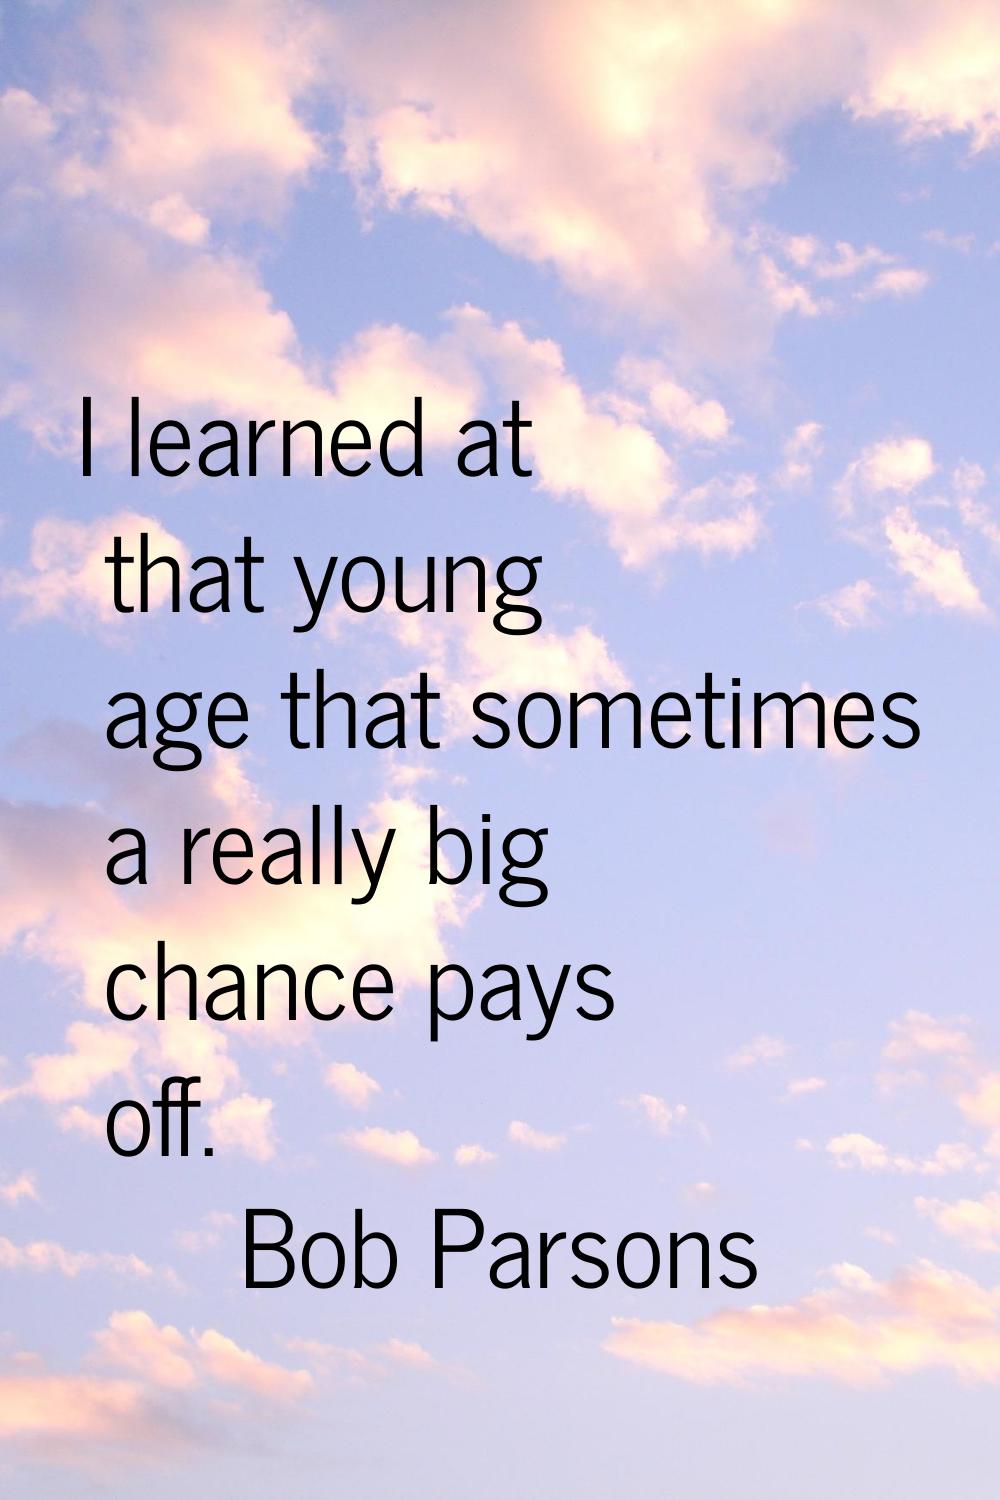 I learned at that young age that sometimes a really big chance pays off.